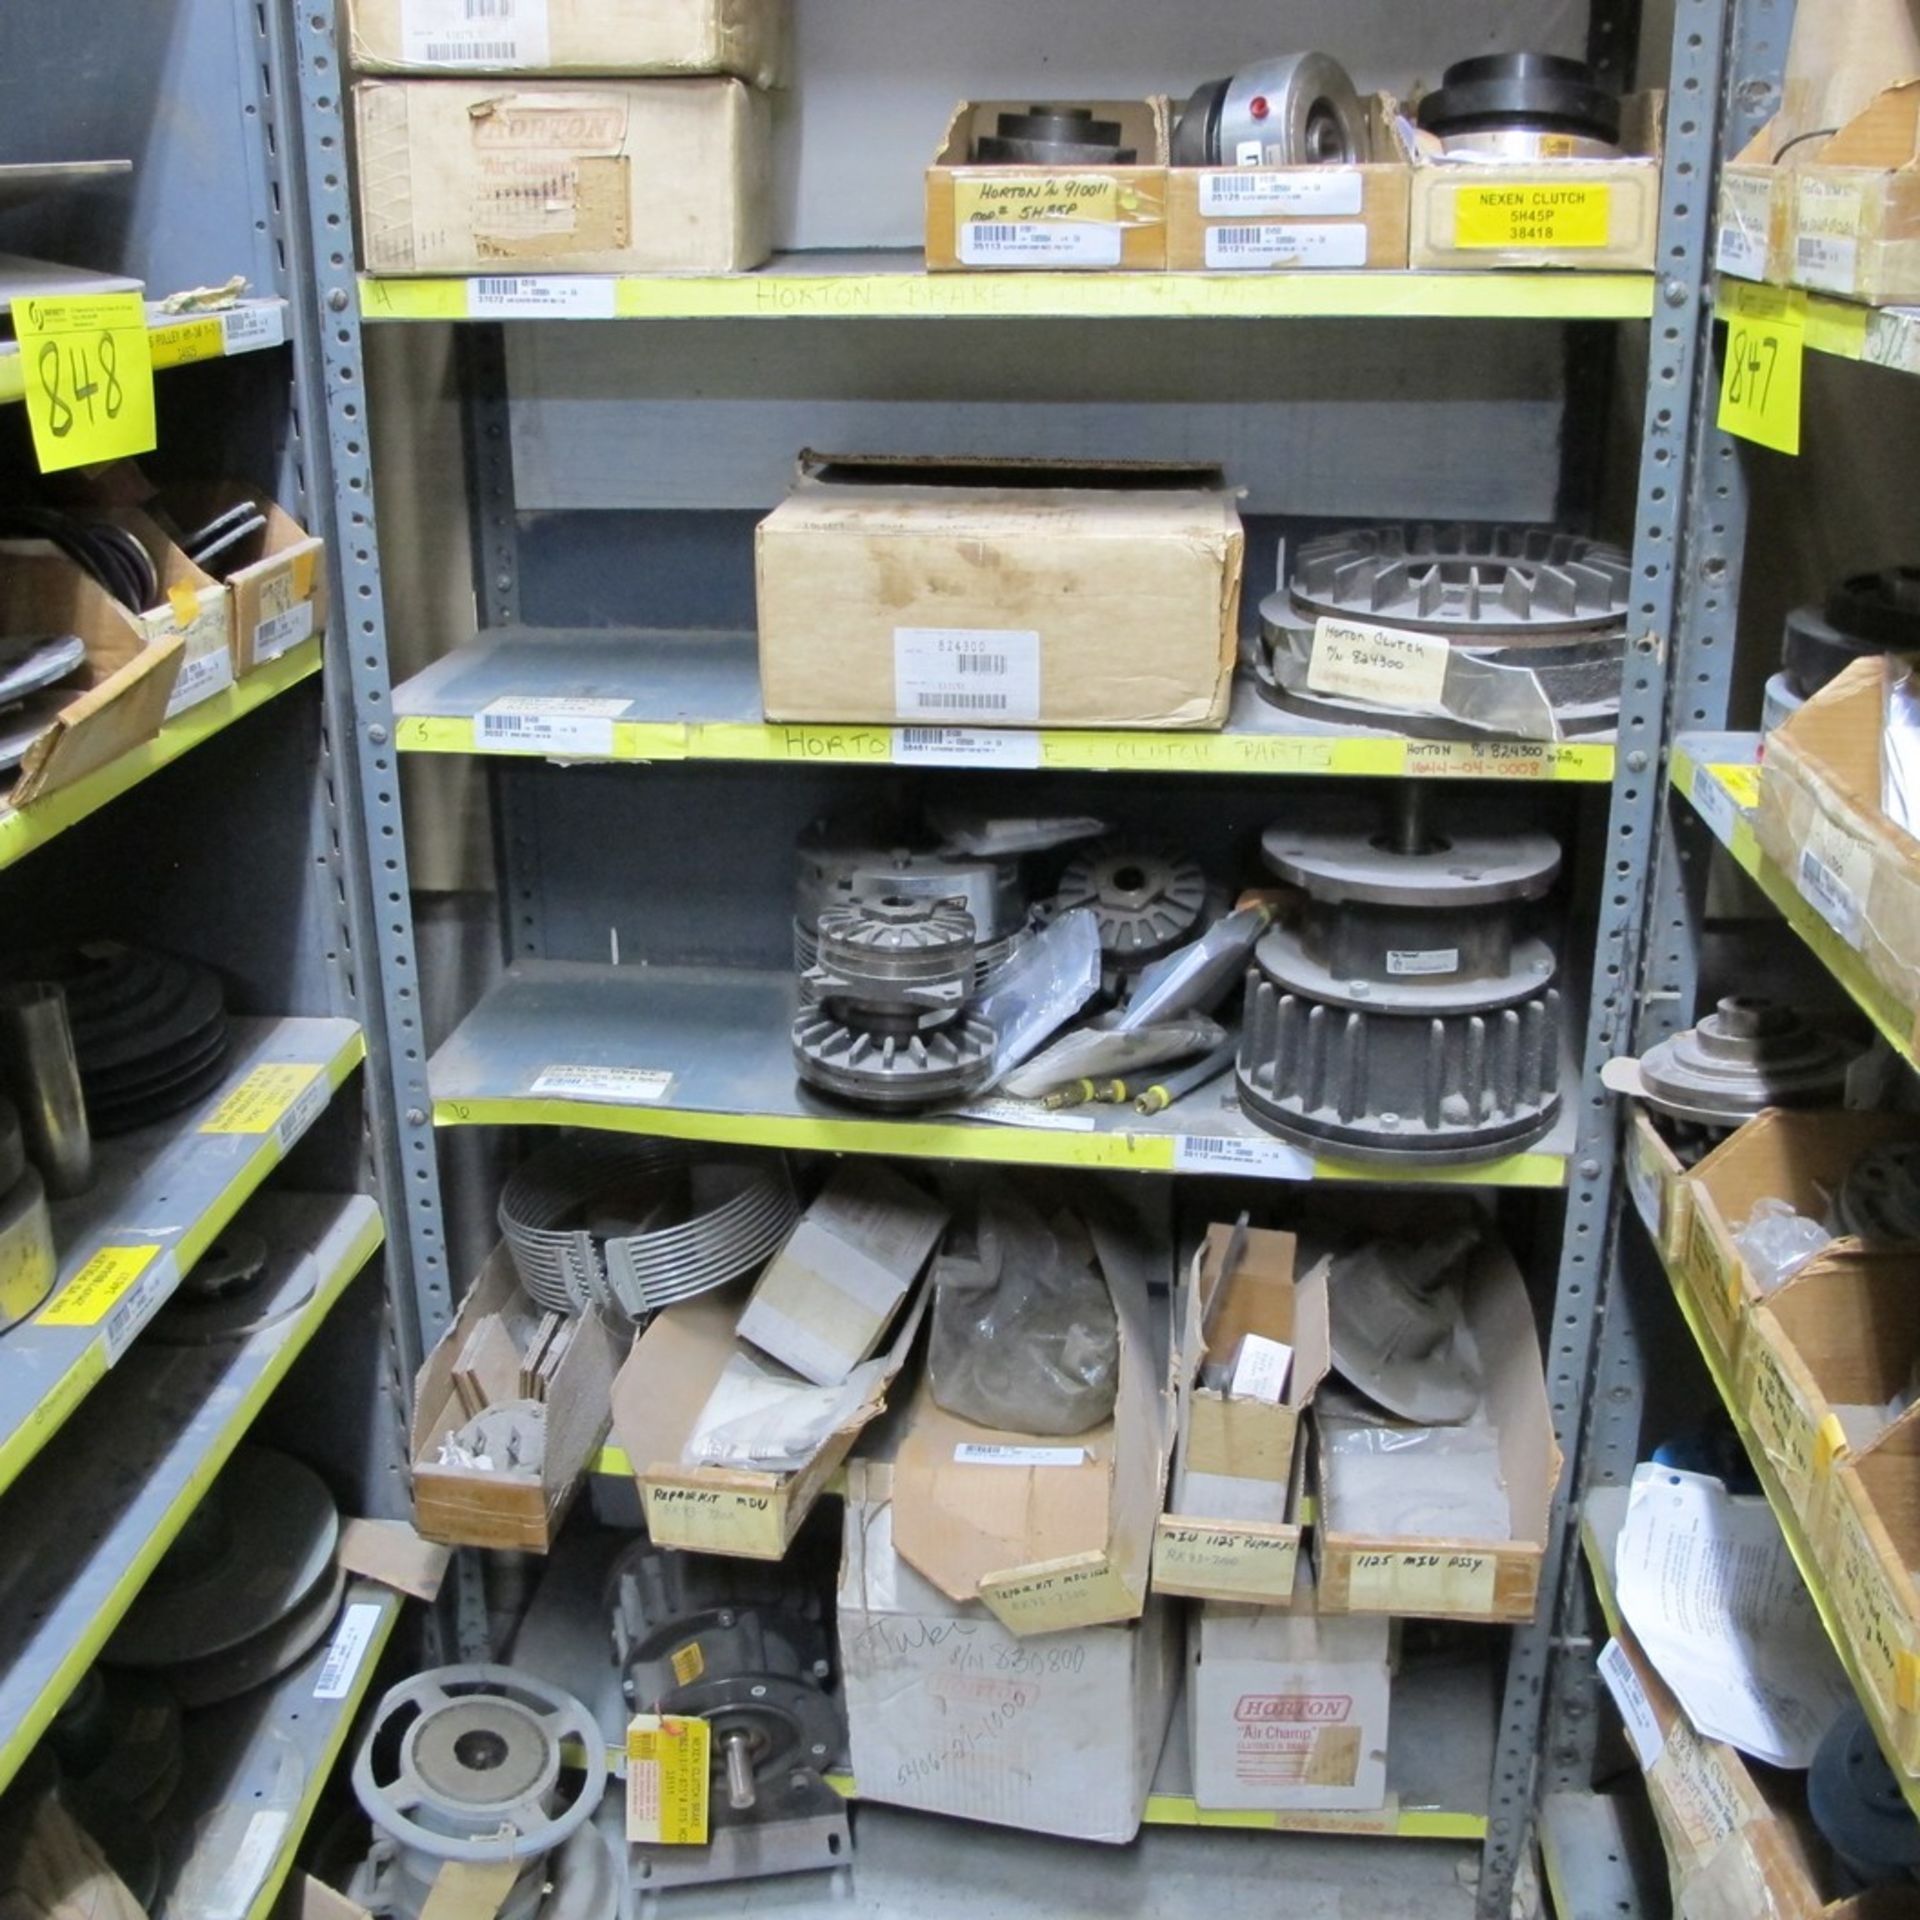 LOT OF ASST. HUBS, CLUTCH ARMATURES, ROTORS, BRAKE PADS, CLUTCH PARTS, MOTOR BREAKS, CAM CLUTCHES, - Image 13 of 13